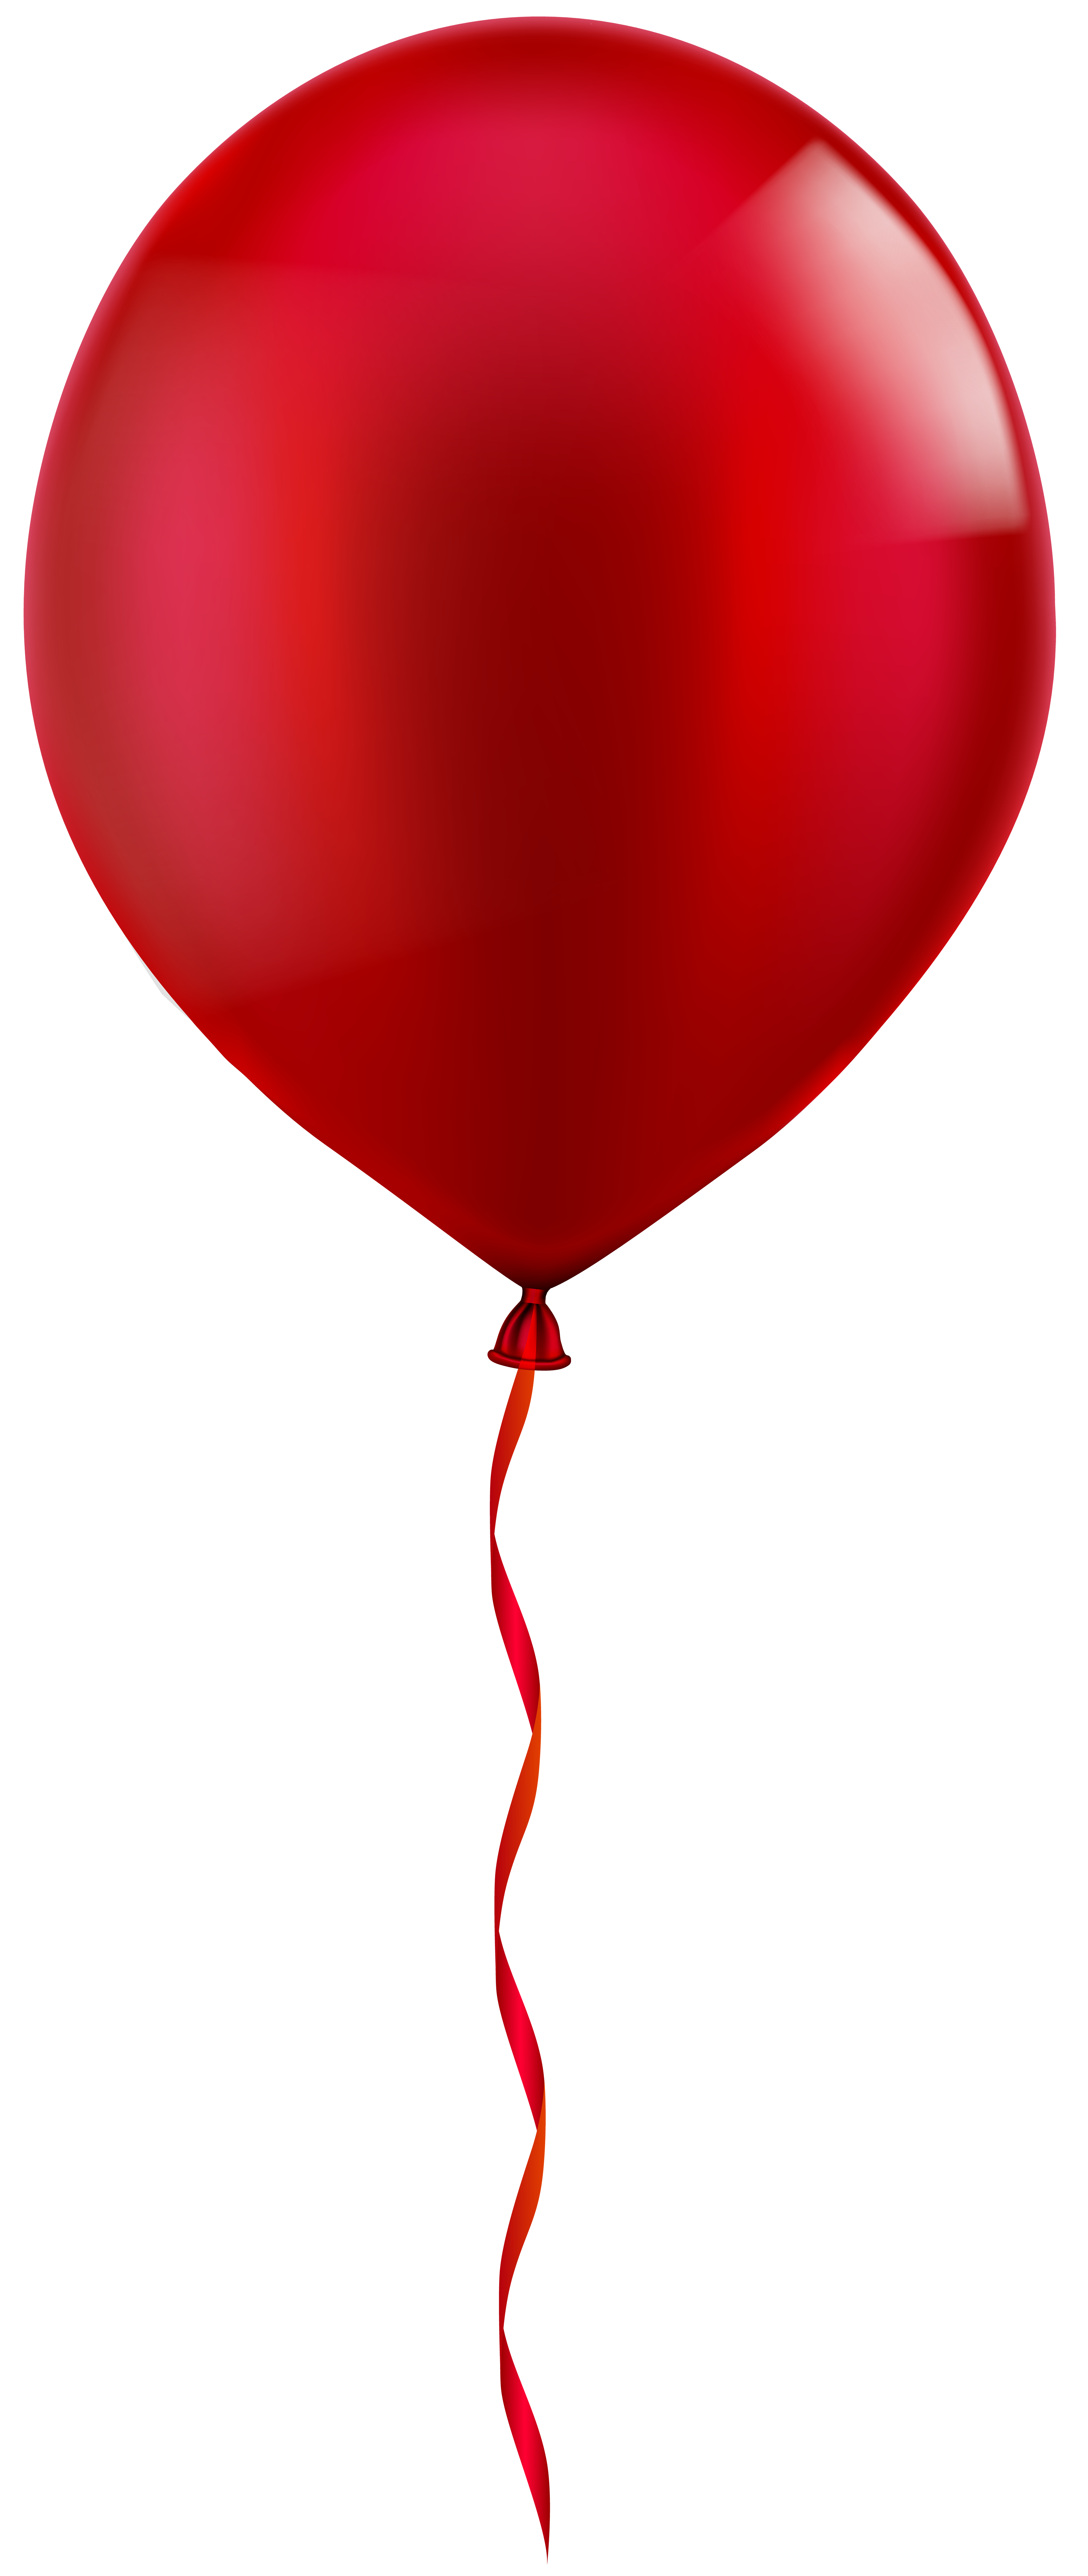 clipart red balloons song